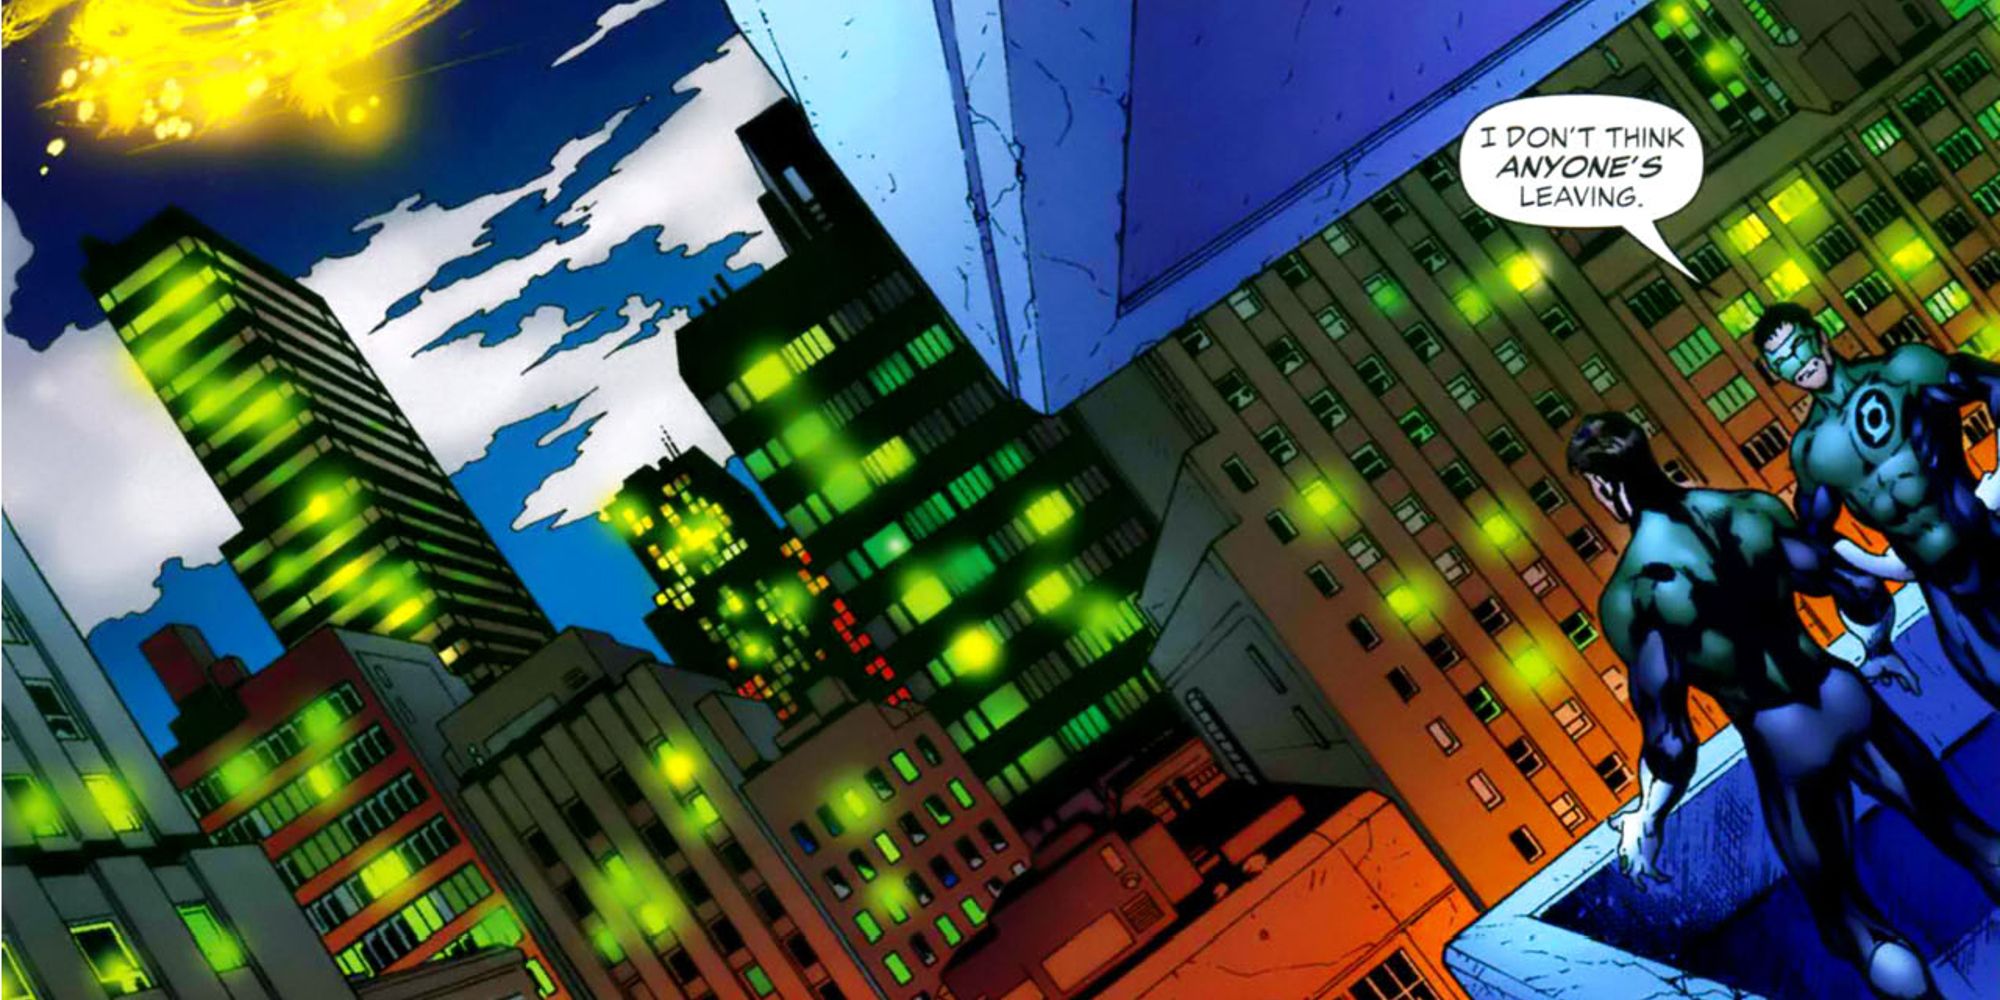 Coast City citizens lighting their home with green lights in Green Lantern comics